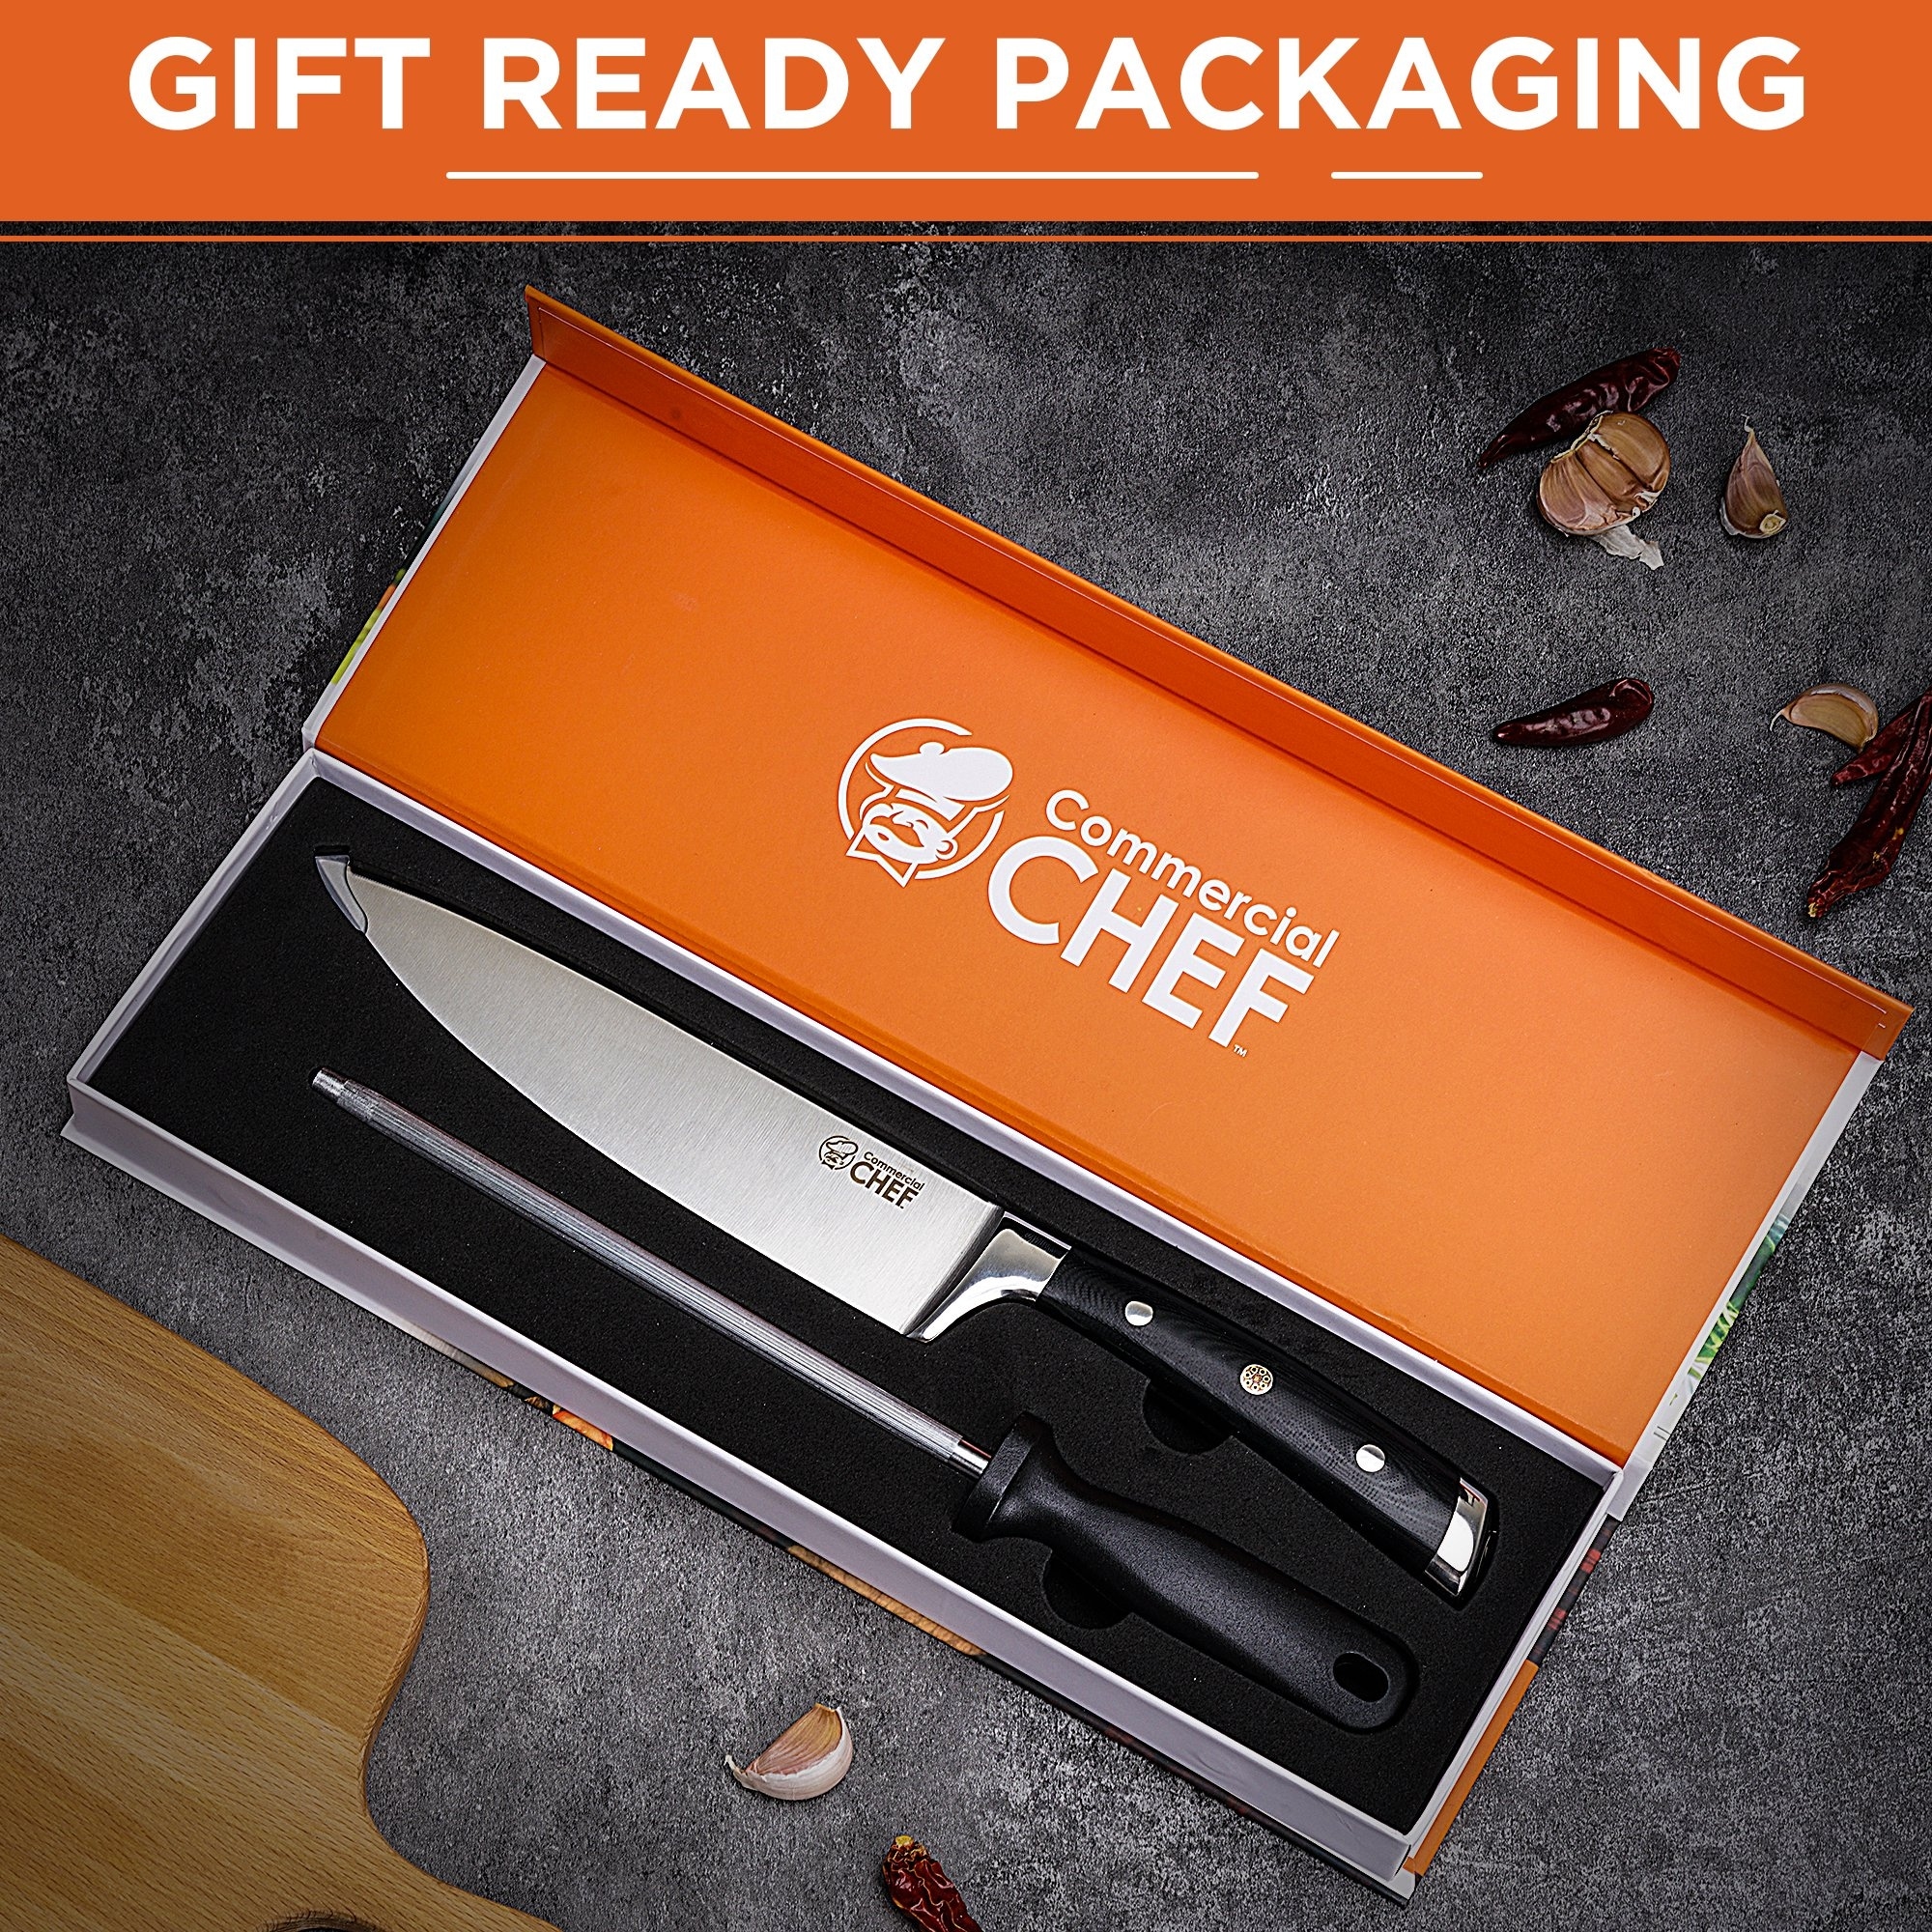 Commercial Chef Pro 8 in. High-Carbon Steel Full Tang Chef's Knife with Triple Rivet G10 Handle with Sharpener